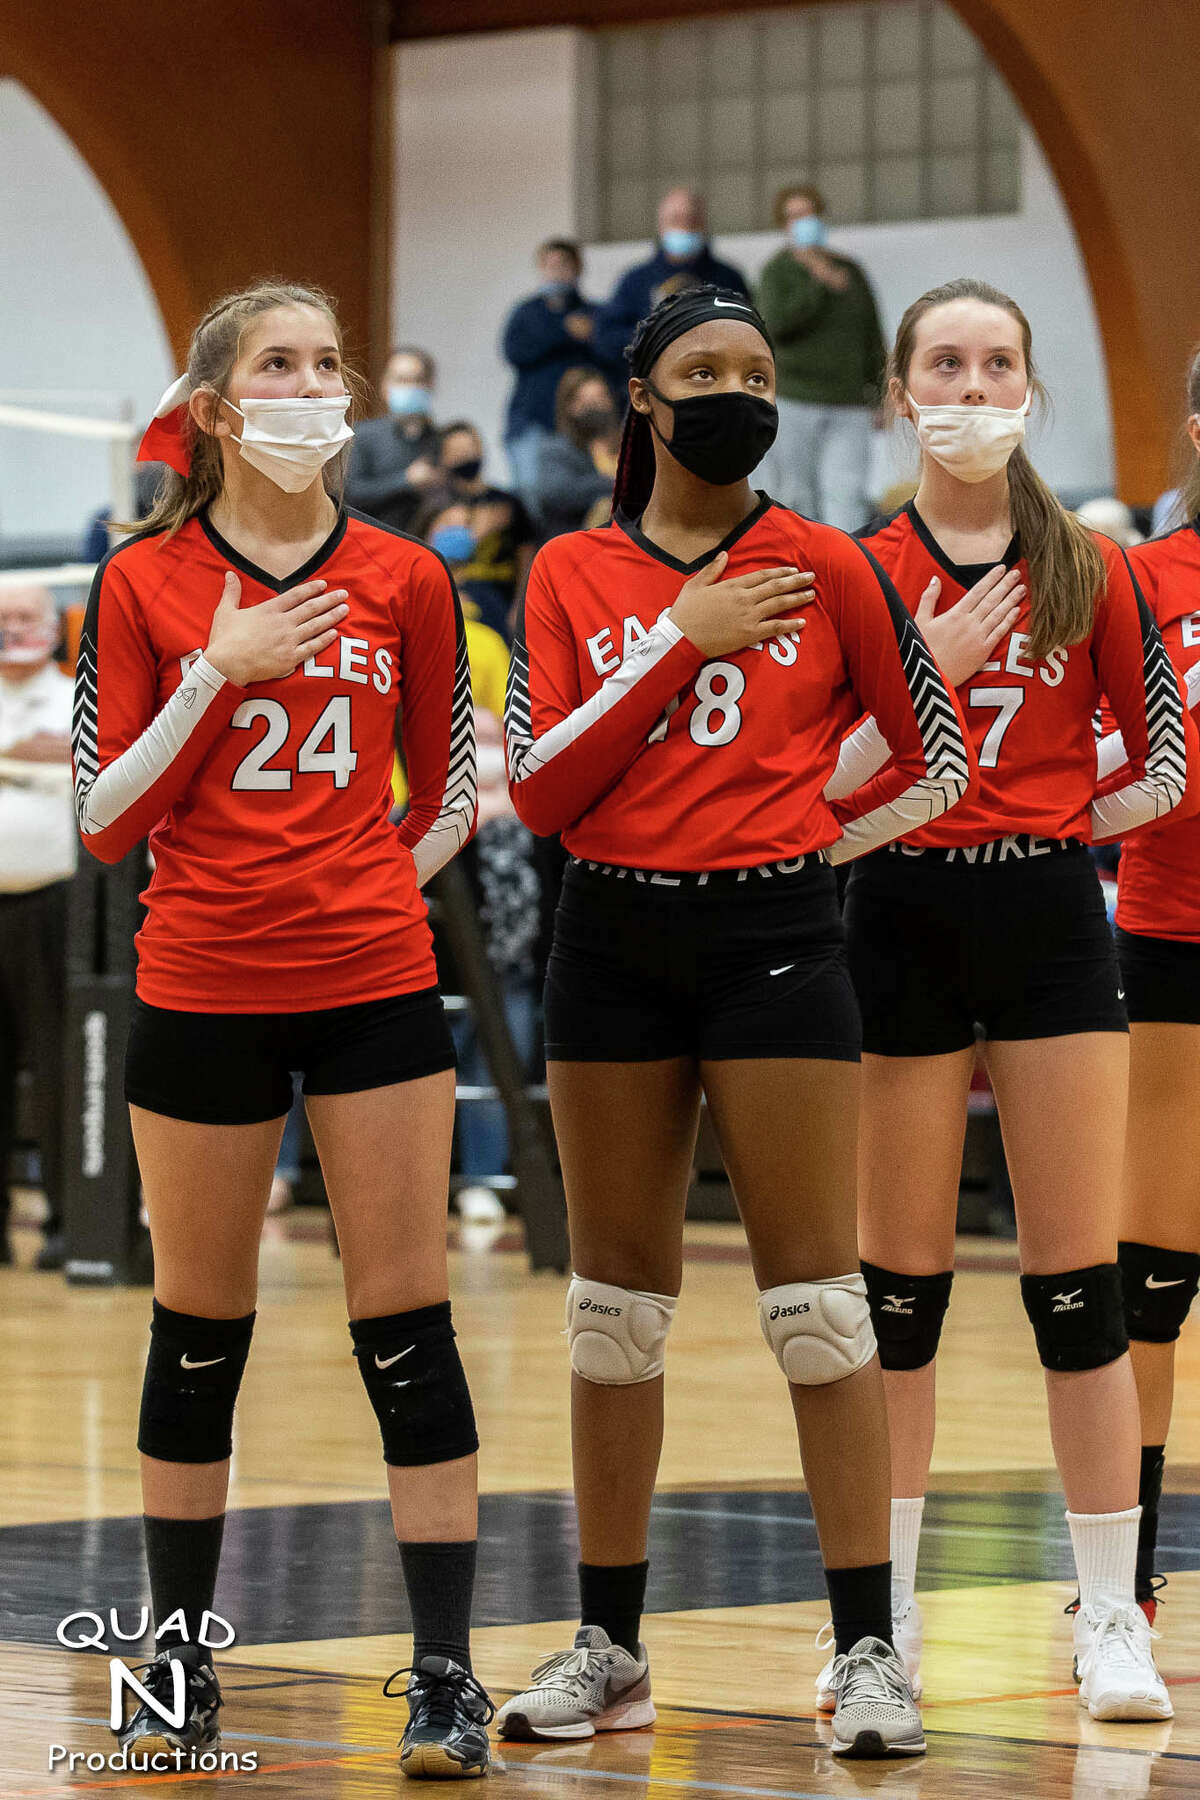 The North Huron varsity volleyball team topped Caseville three games to none on Wednesday night in their district semifinal match-up. The Warriors won, 25-14, 25-4, 25-13.